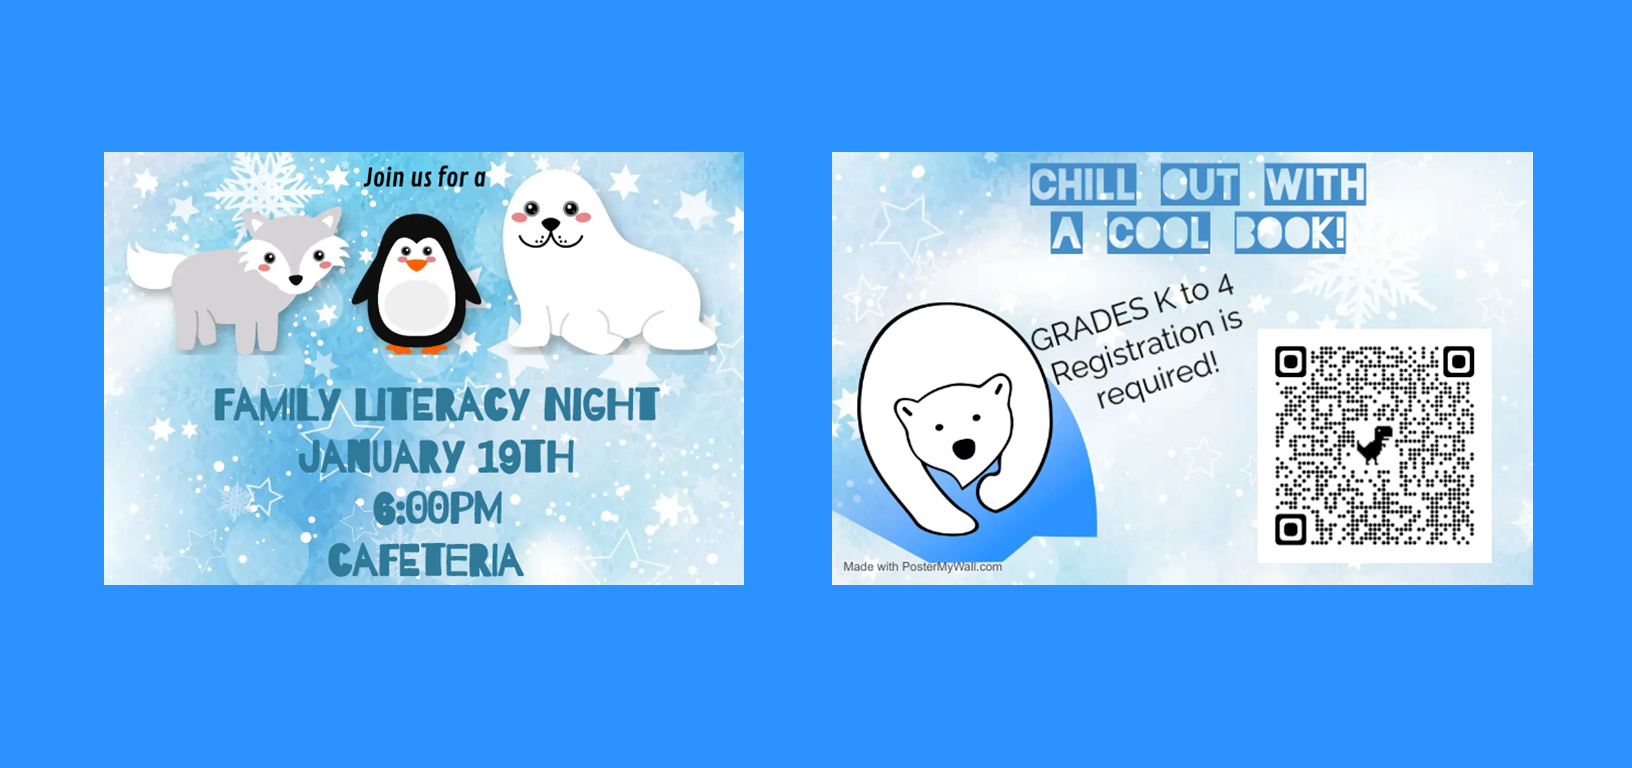 Join us for a Family Literacy Night. January 19th. 6:00PM. Cafeteria. Chill out with a cool book! Grades K to 4 registration is required! Barcode Scan.